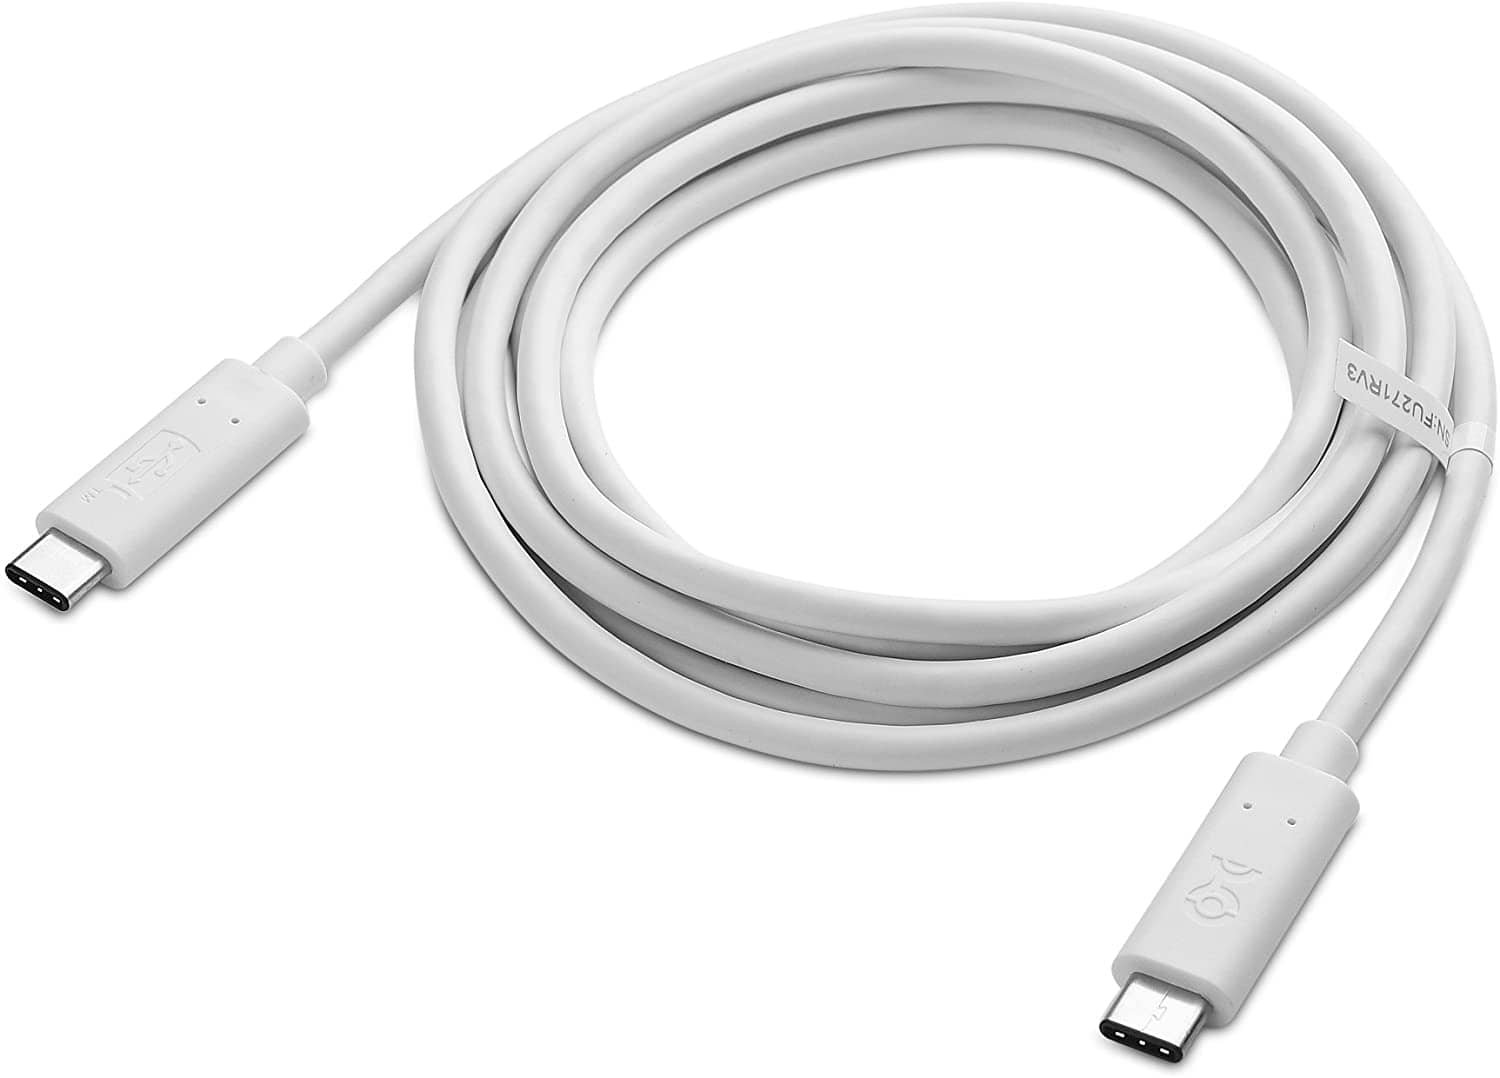 Cable Matter USB C to USB C cable